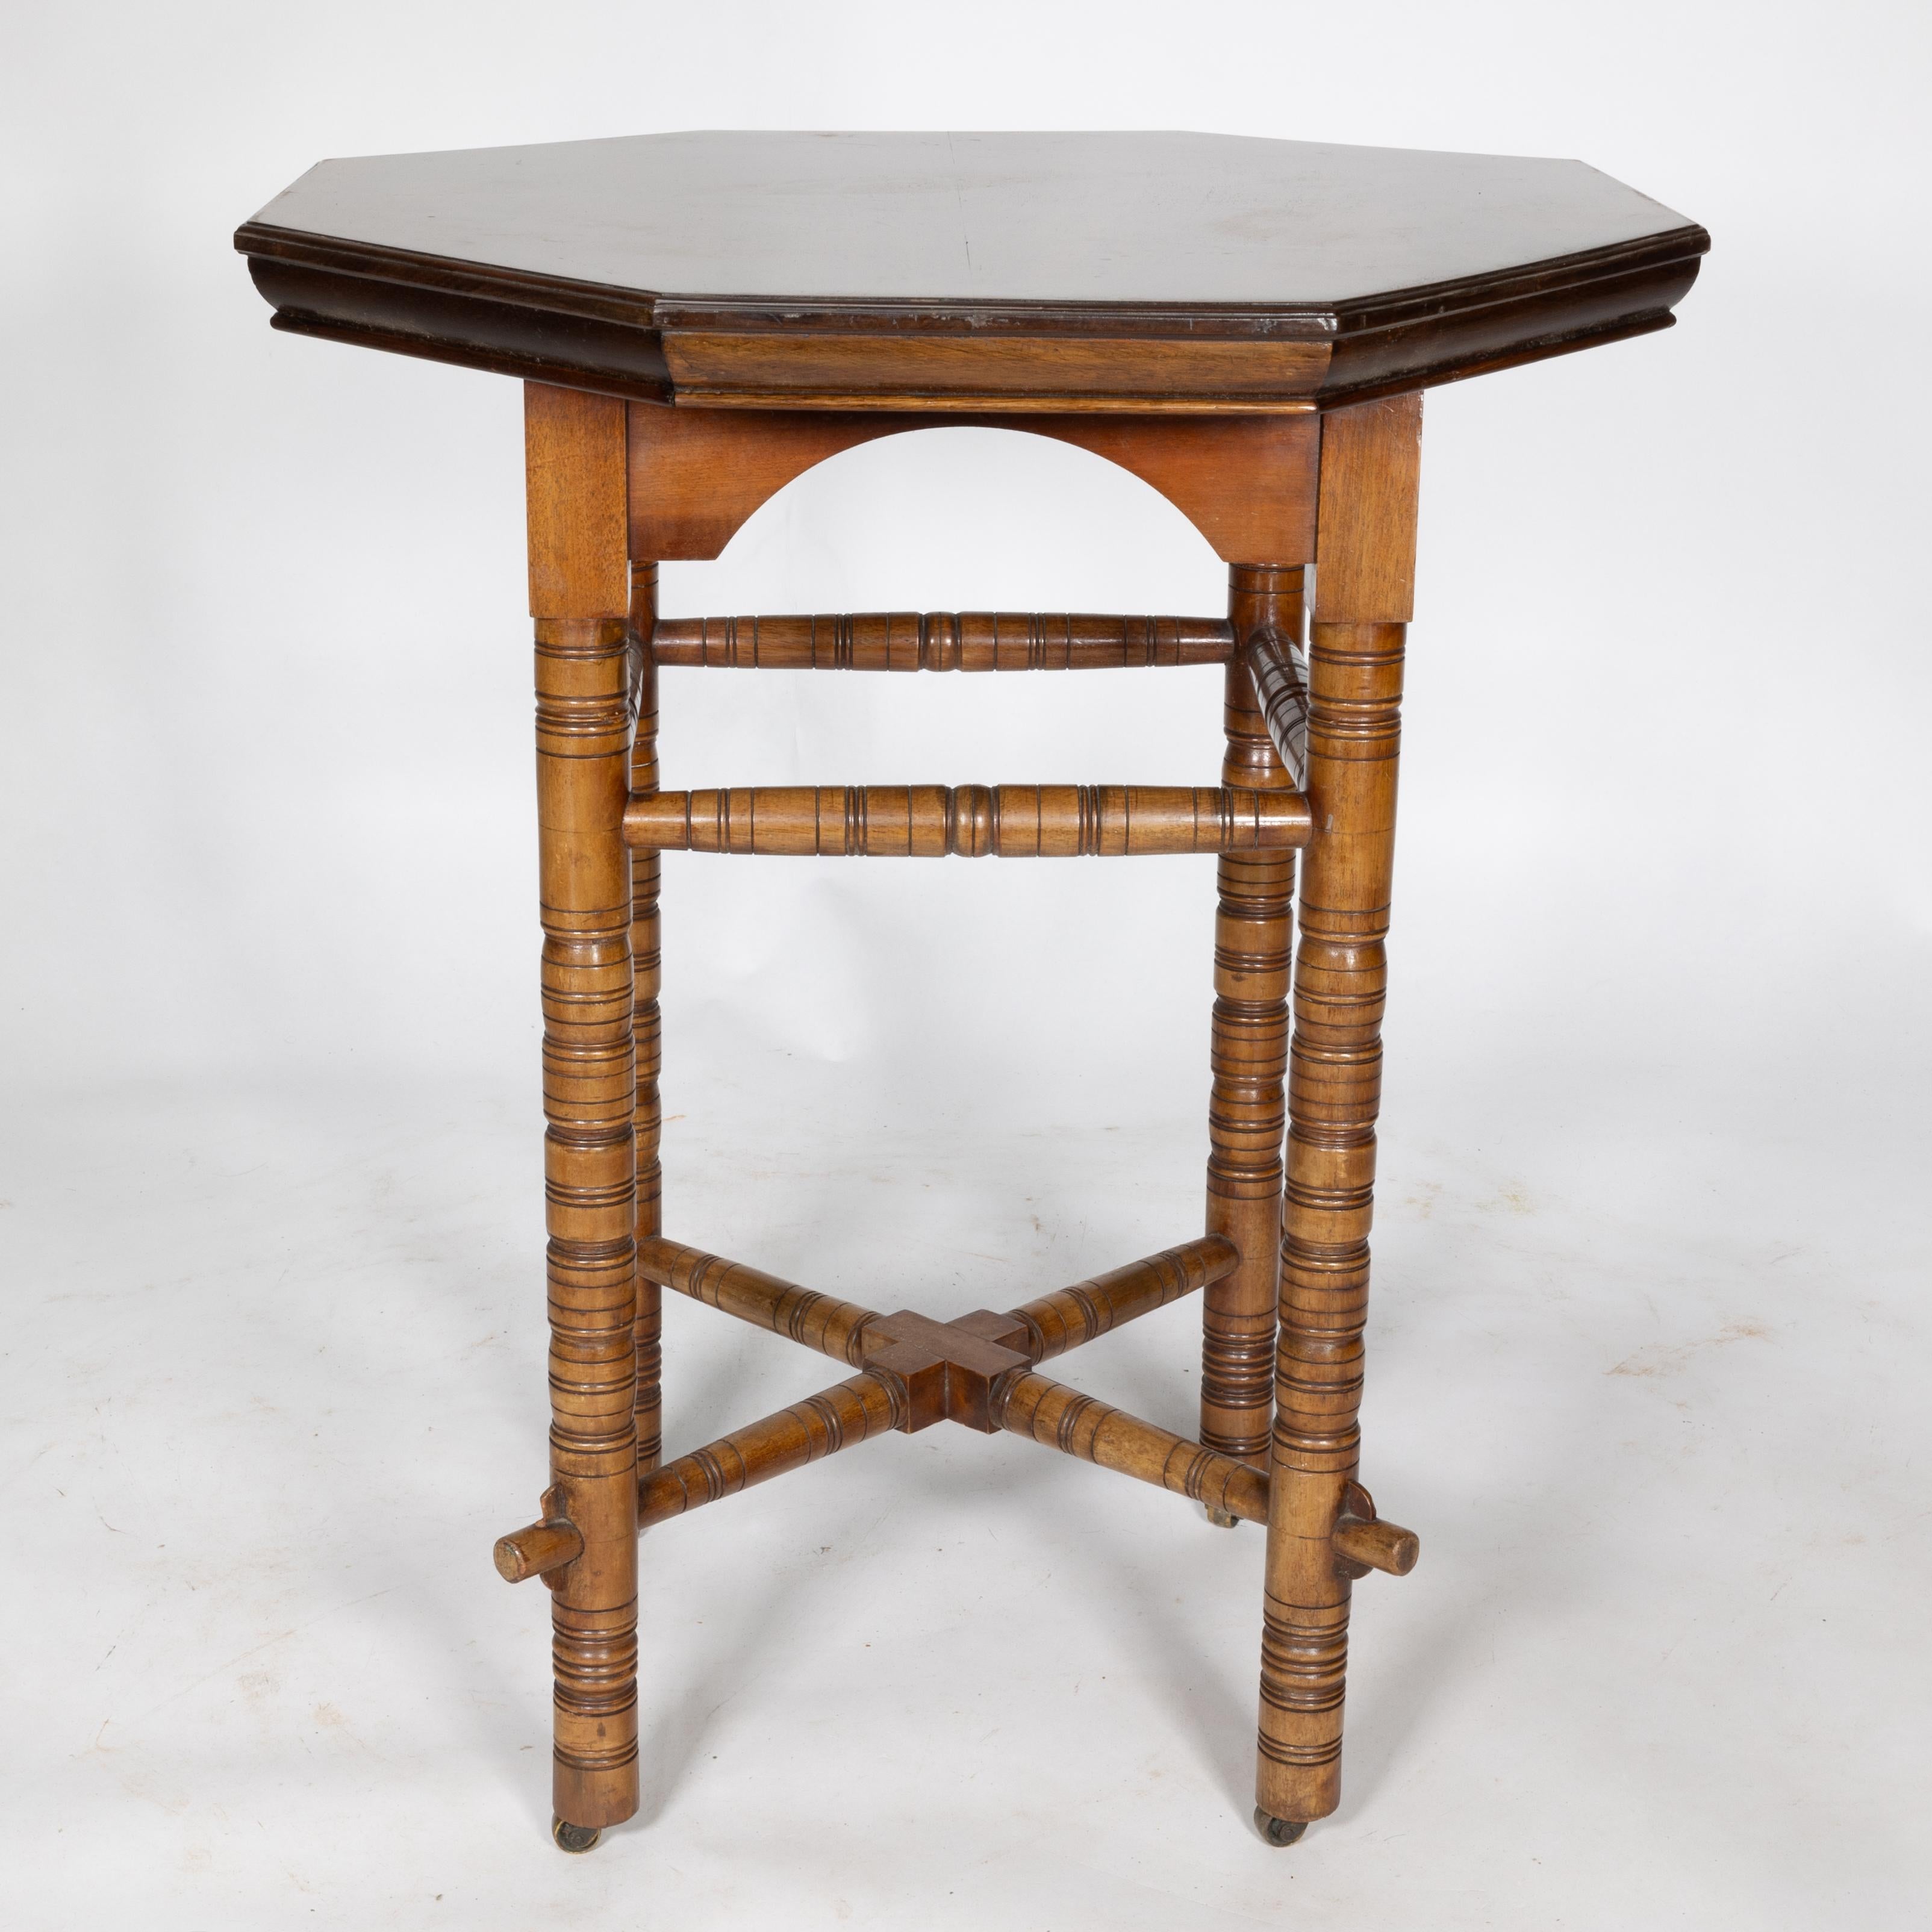 Late 19th Century E W Godwin (style of). An Aesthetic Movement walnut octagonal table For Sale